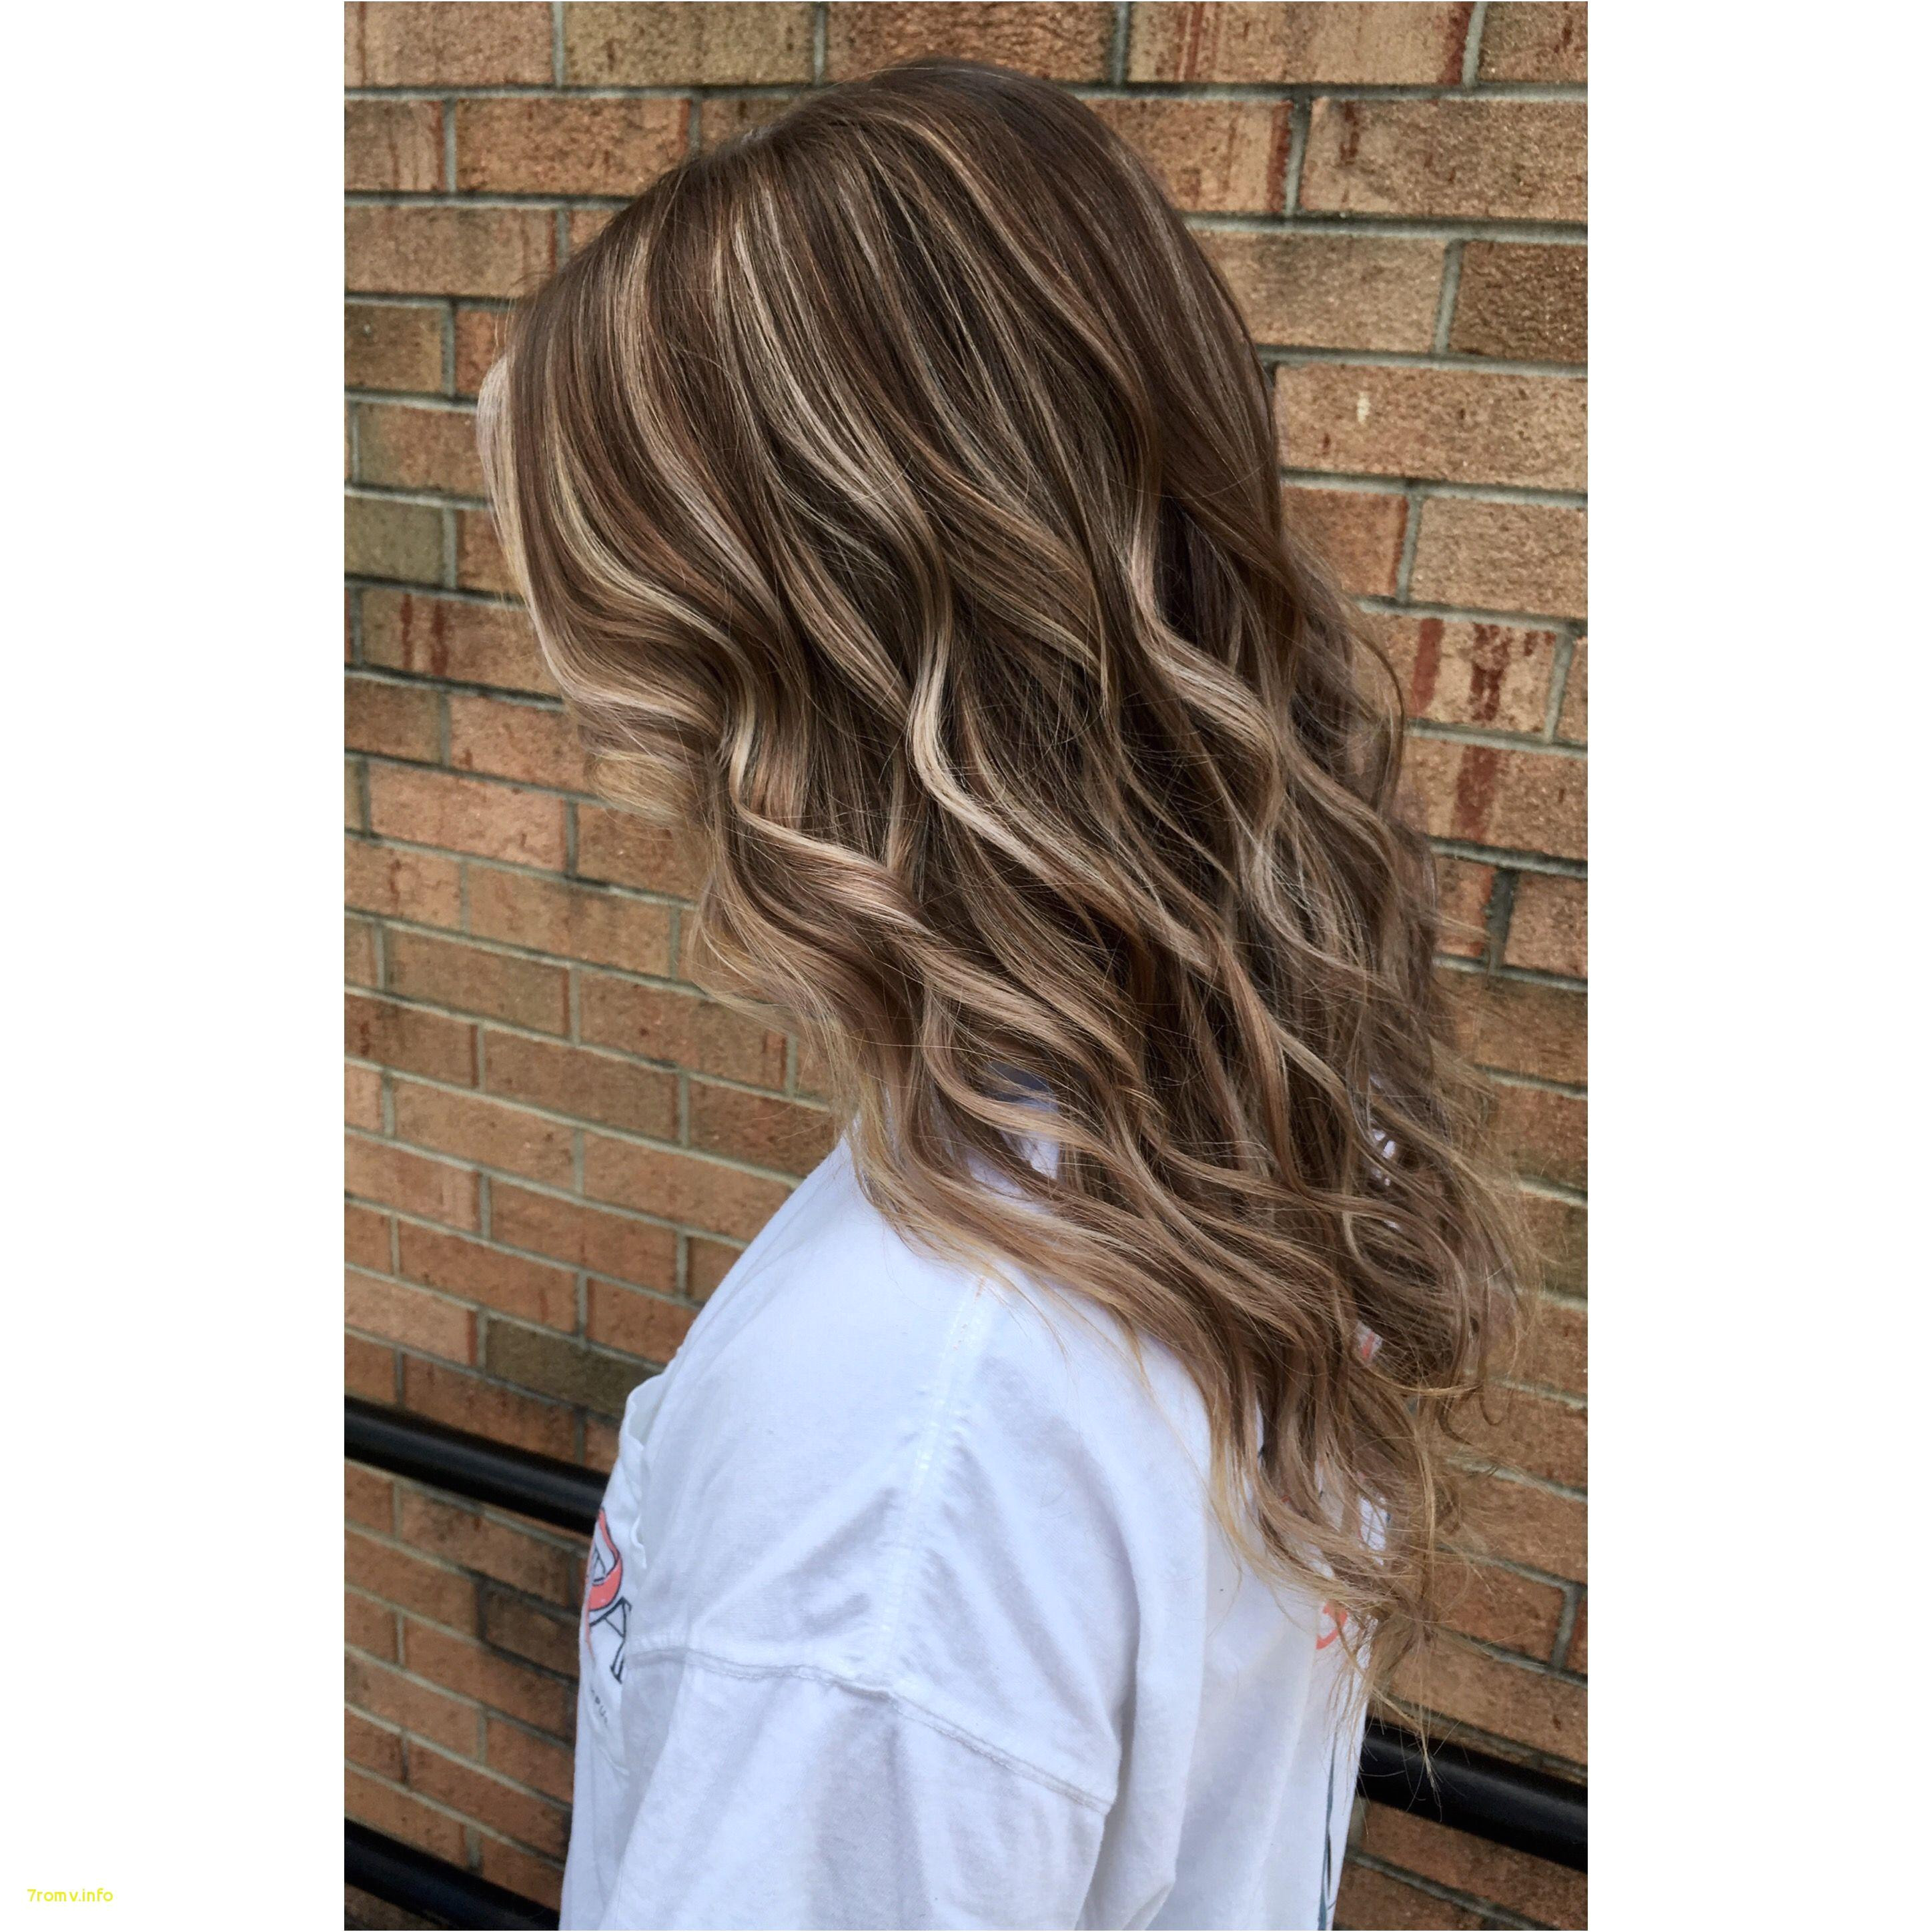 002 Hairstyle Ideas Hairr Dark Blonde Light Brown Inspirational With Highlights Od Impressive Hair Color